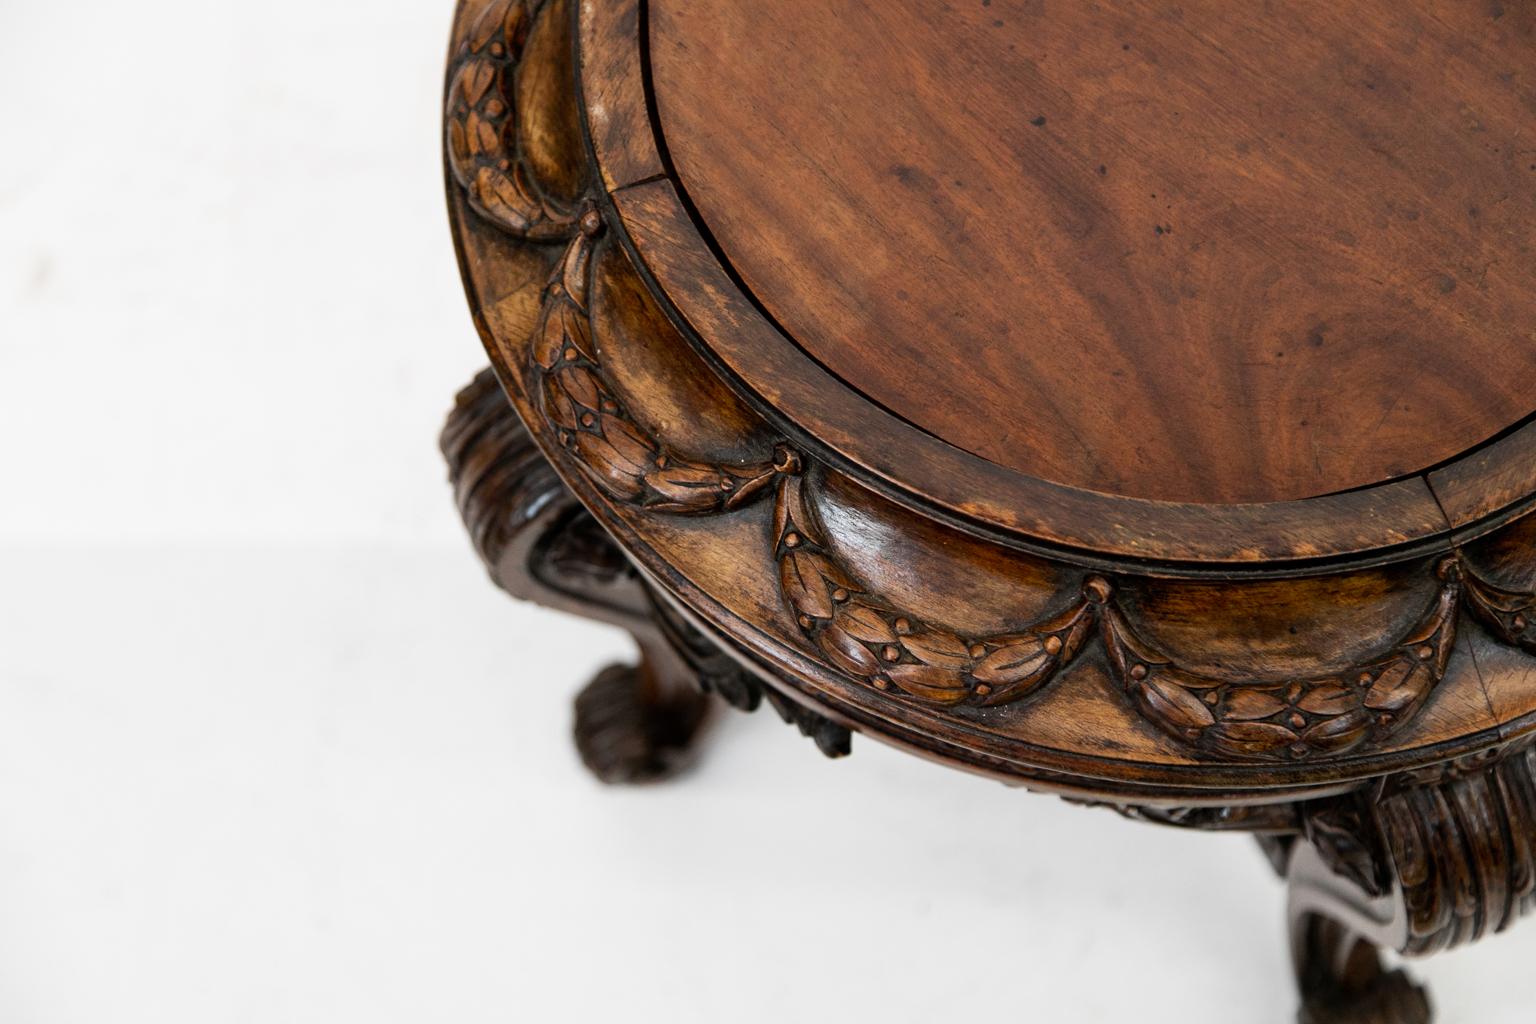 Carved English jardinière stand, this stand has a convex upper frieze with floral swags. The lower frieze is fluted with floral carvings. The four cabriole legs with acanthus carved knees and carved French scrolled feet.; carved cross stretcher with